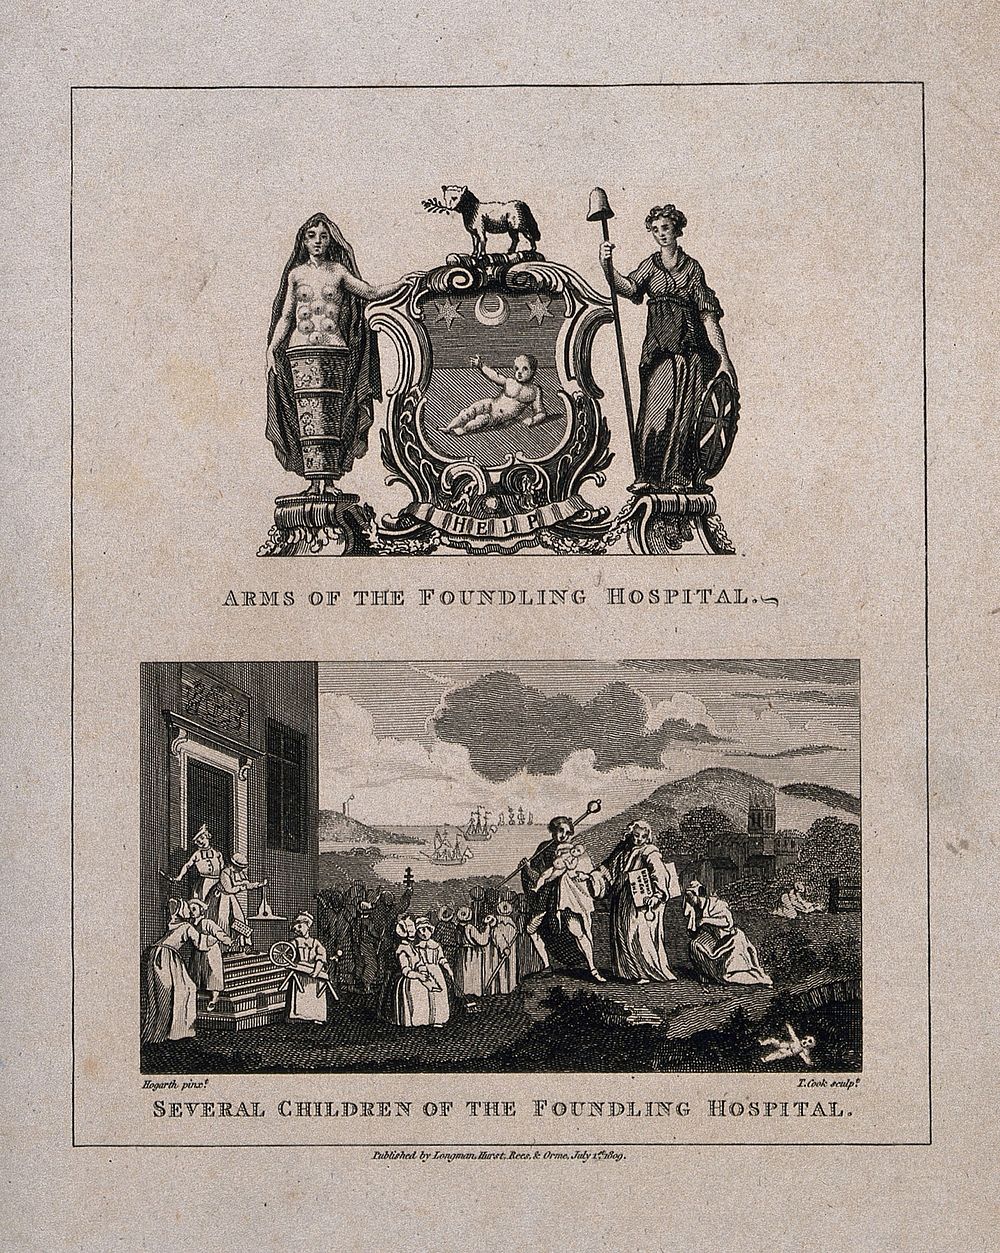 Foundling Hospital: above, the achievement of arms, below, Captain Coram and several children, carrying implements of work…